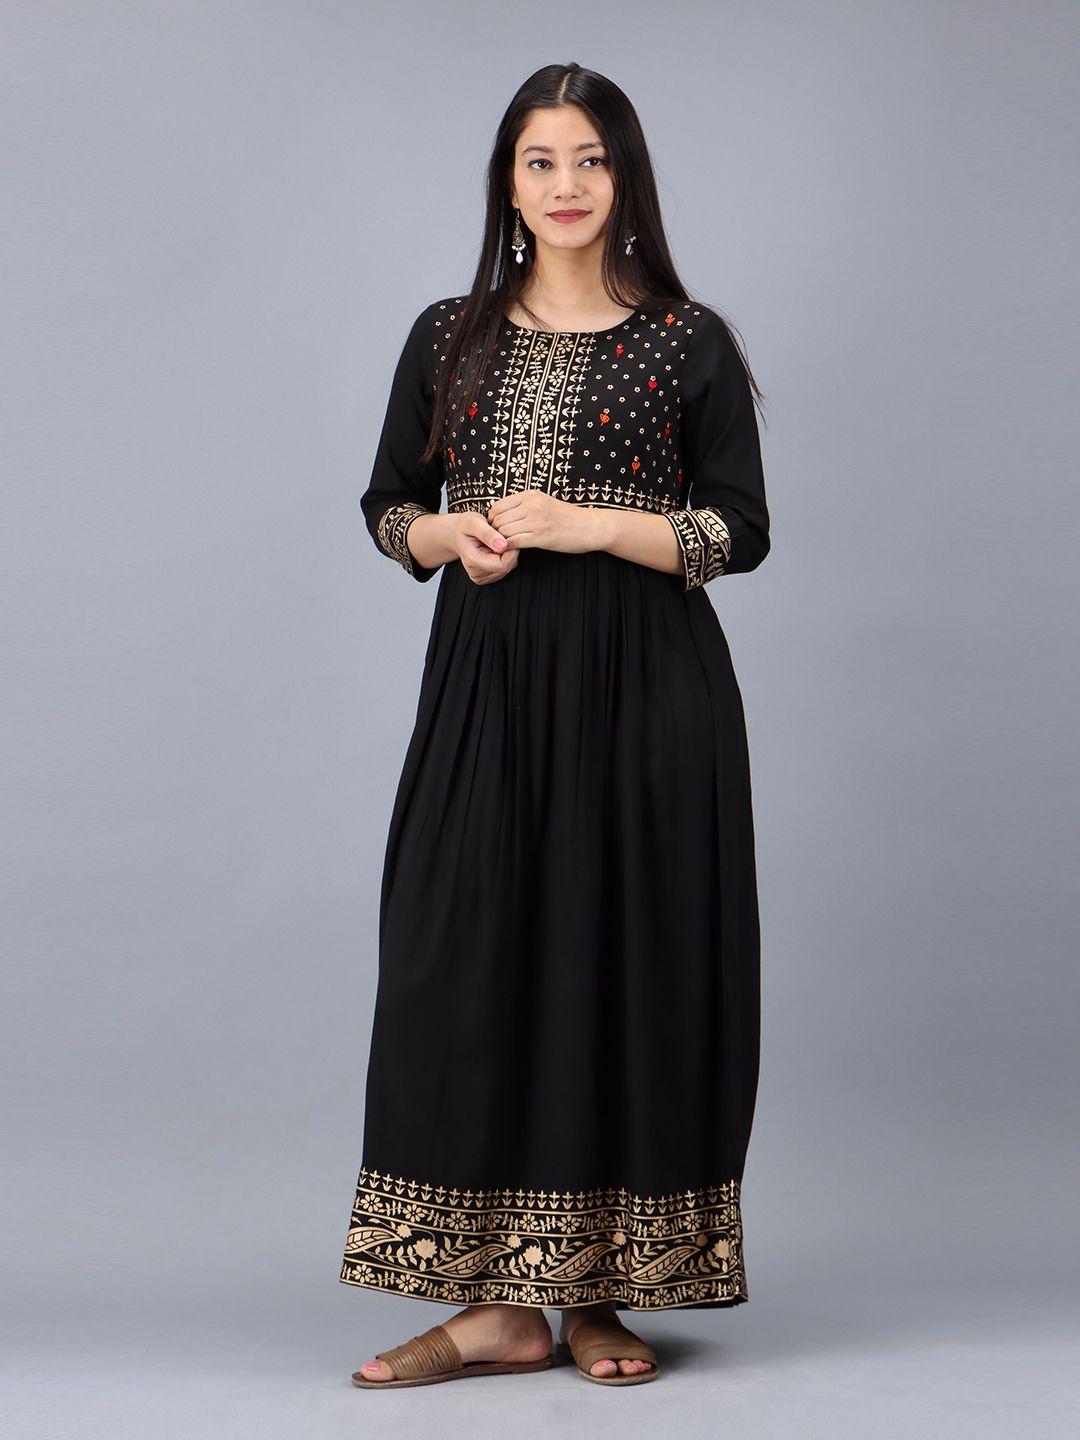 nehamta round neck floral printed embroidered a-line ethnic dress